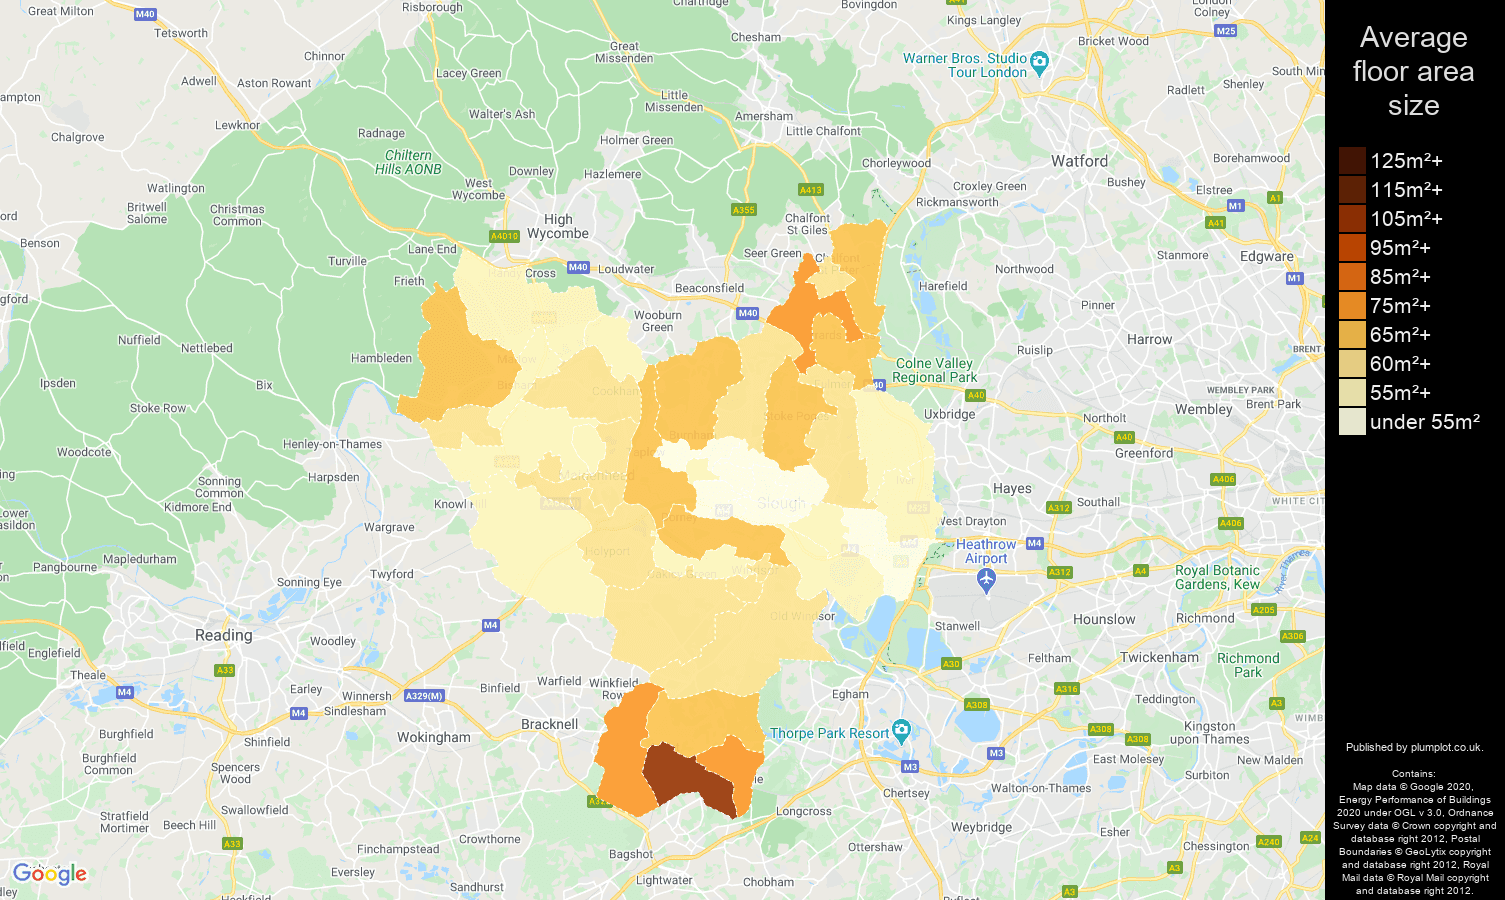 Slough map of average floor area size of flats